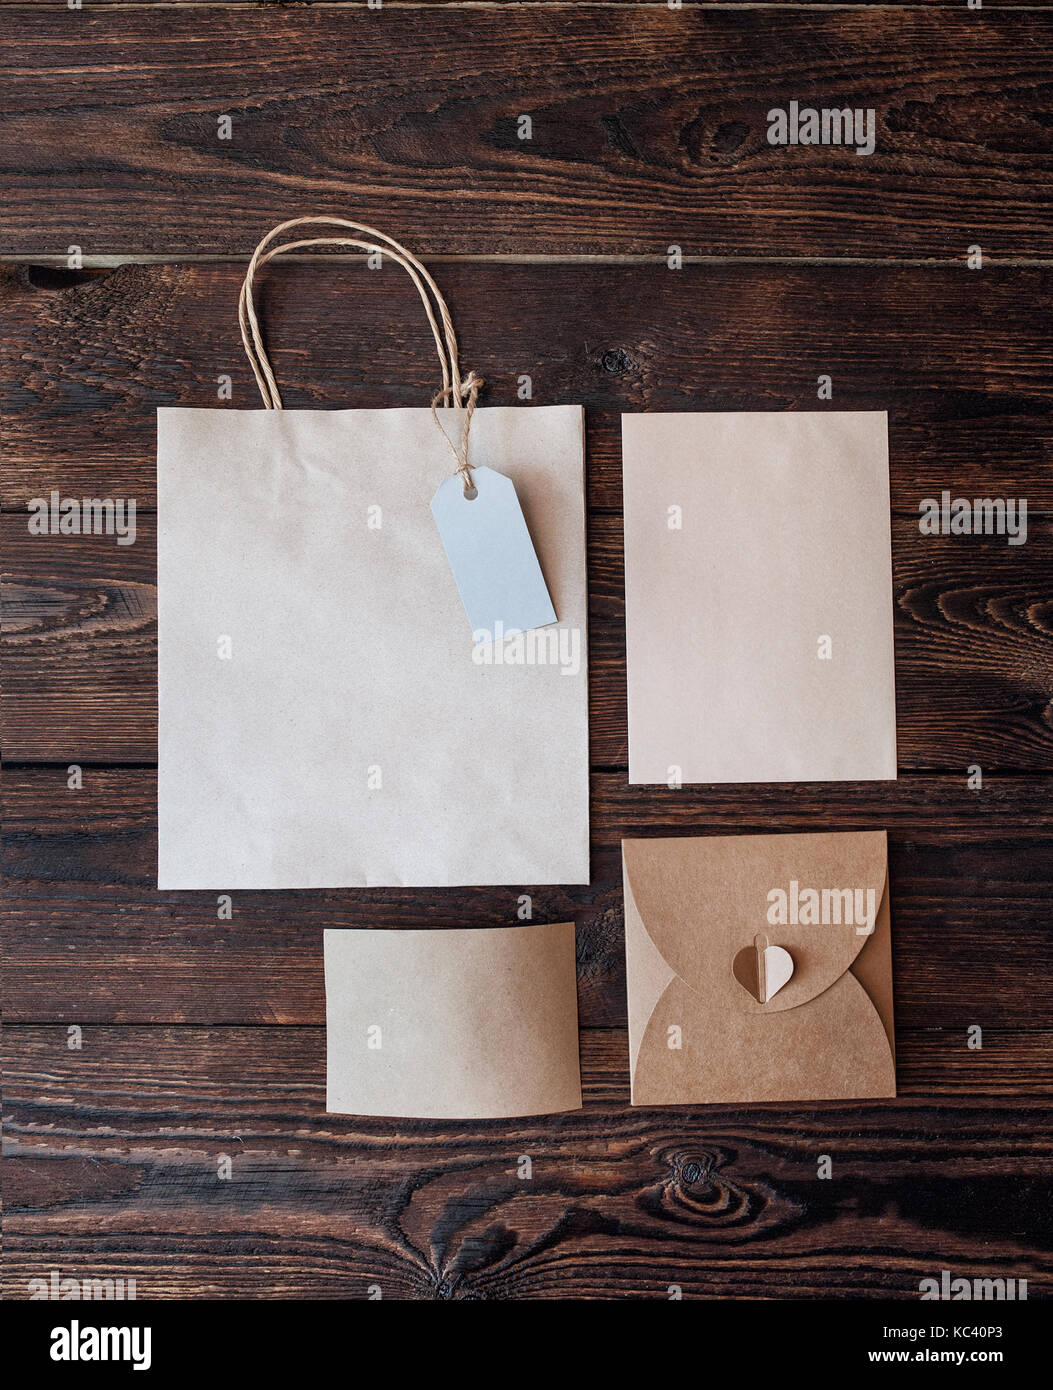 Mockup Paper bag from kraft paper with gift tag and Christmas gift boxes on a wooden background Stock Photo